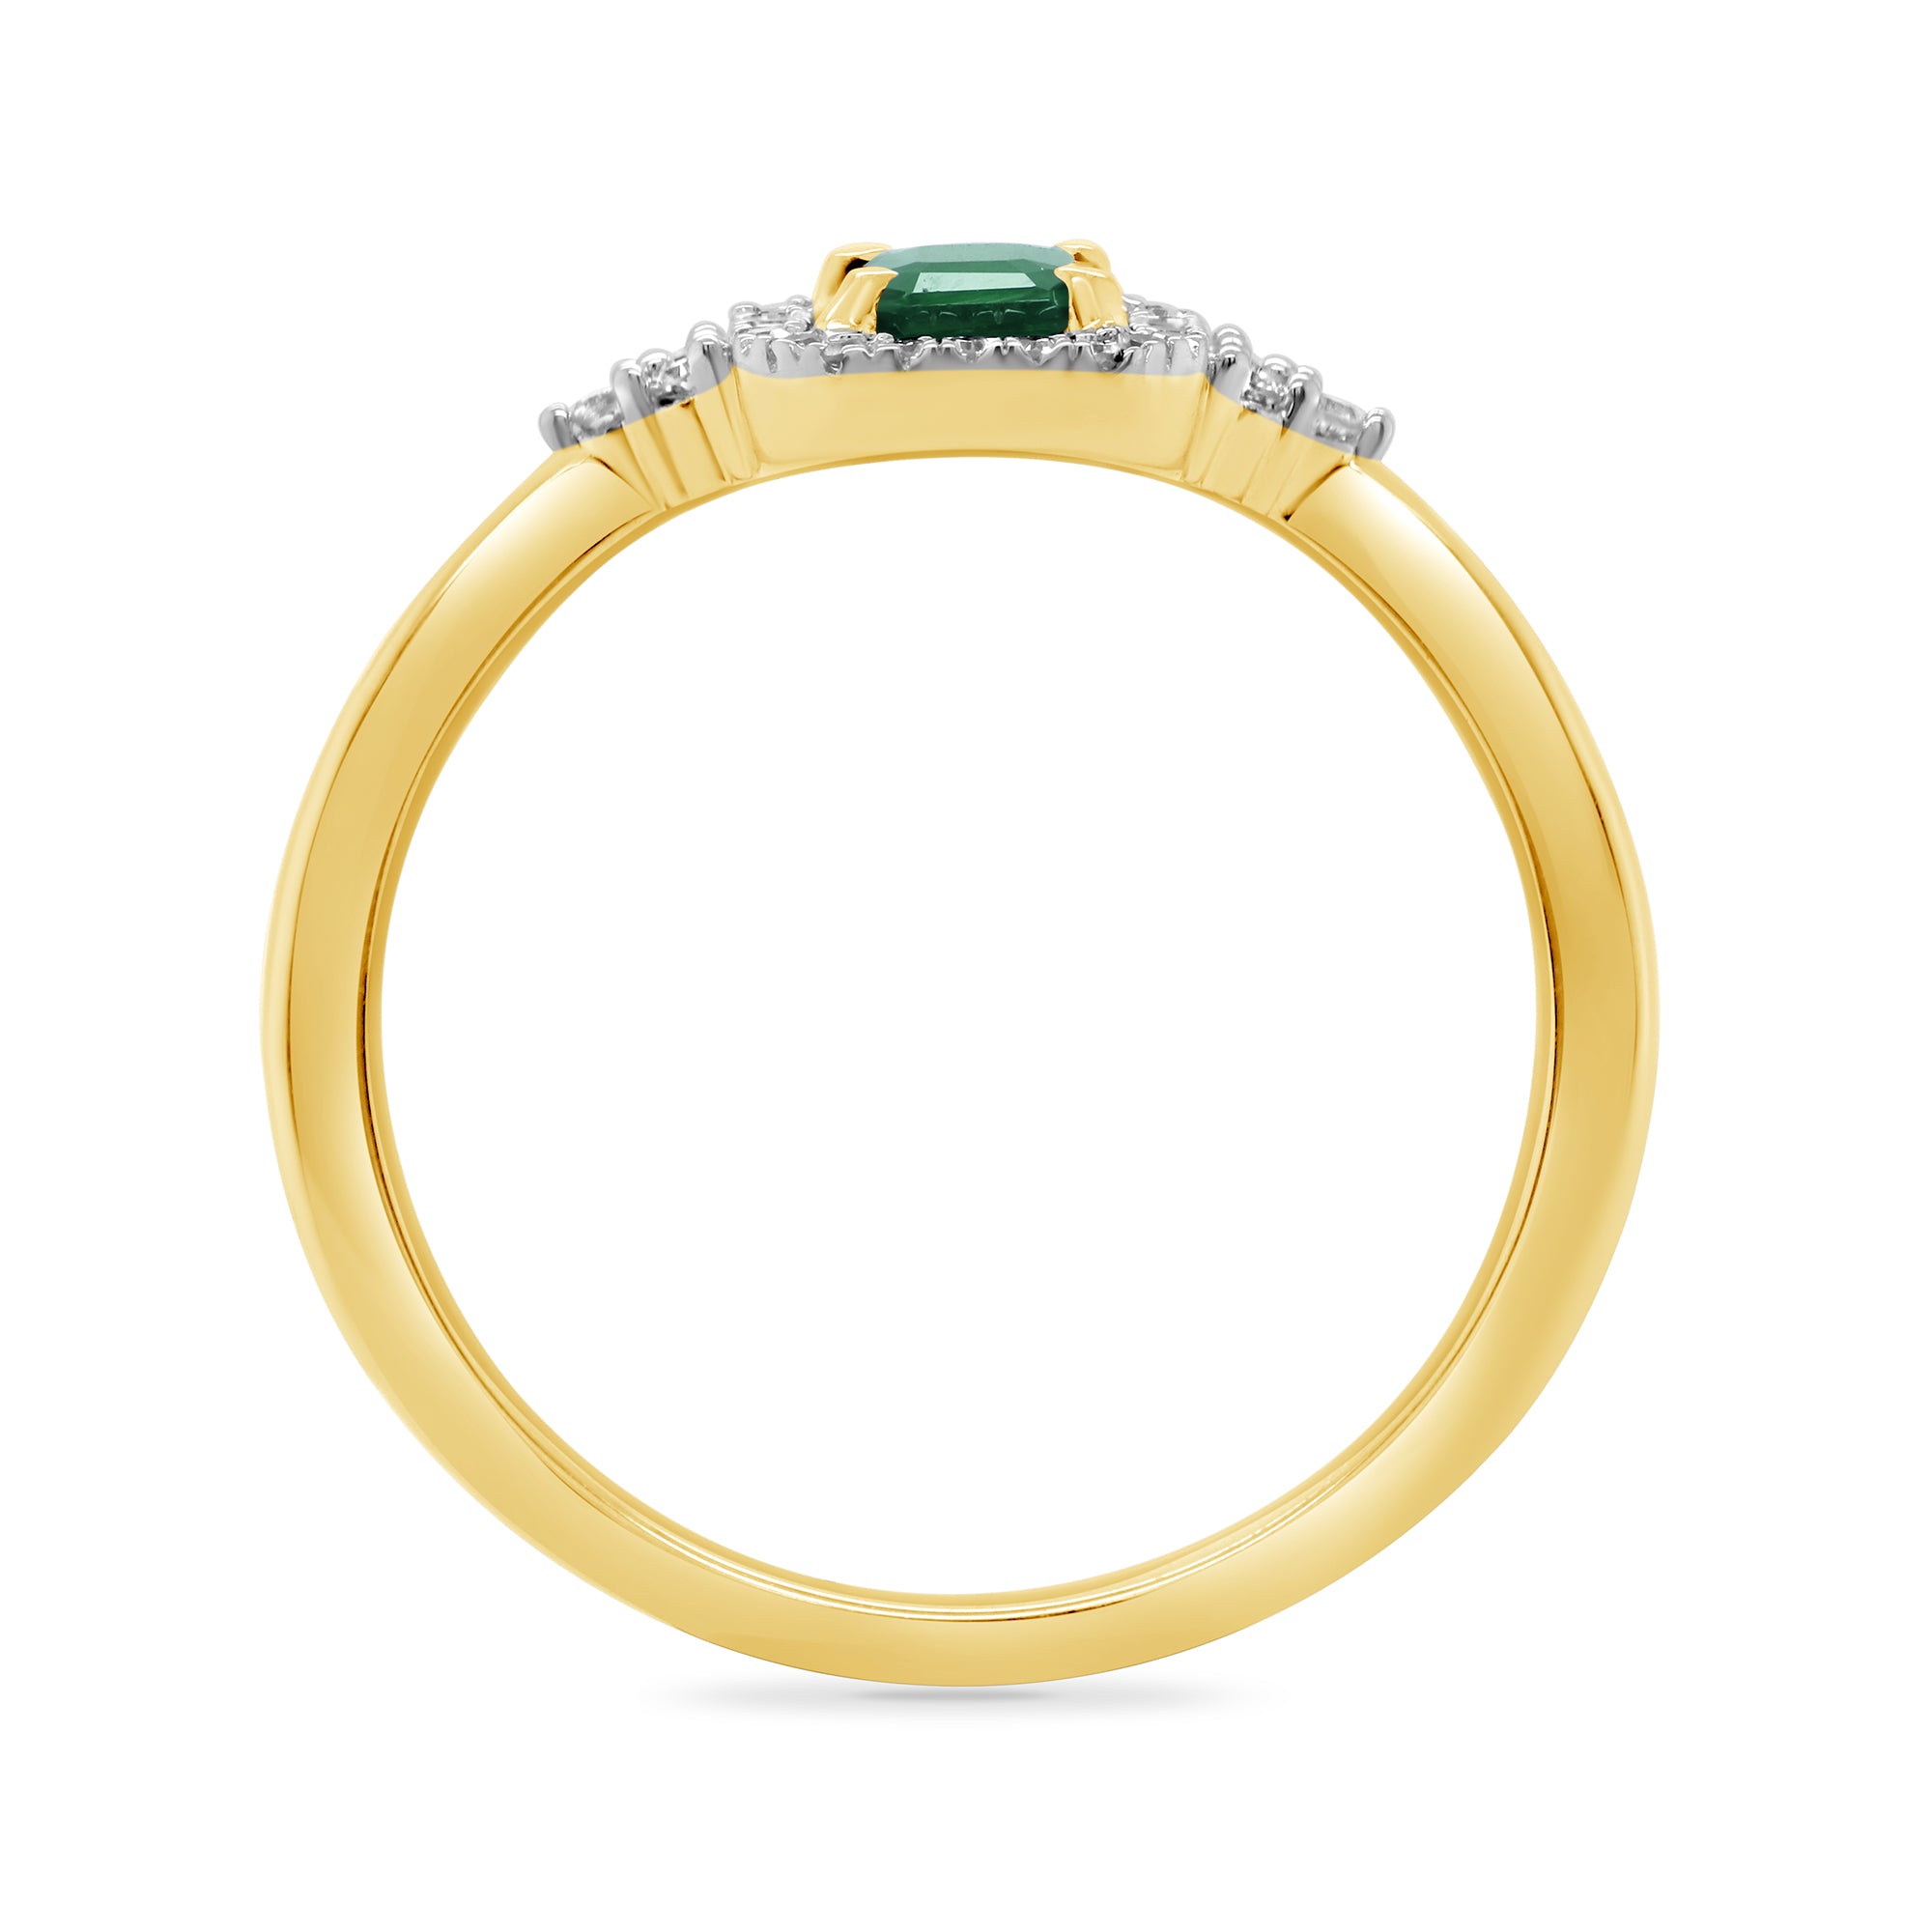 9ct gold 6x4mm octagon emerald & diamond cluster ring 0.10ct